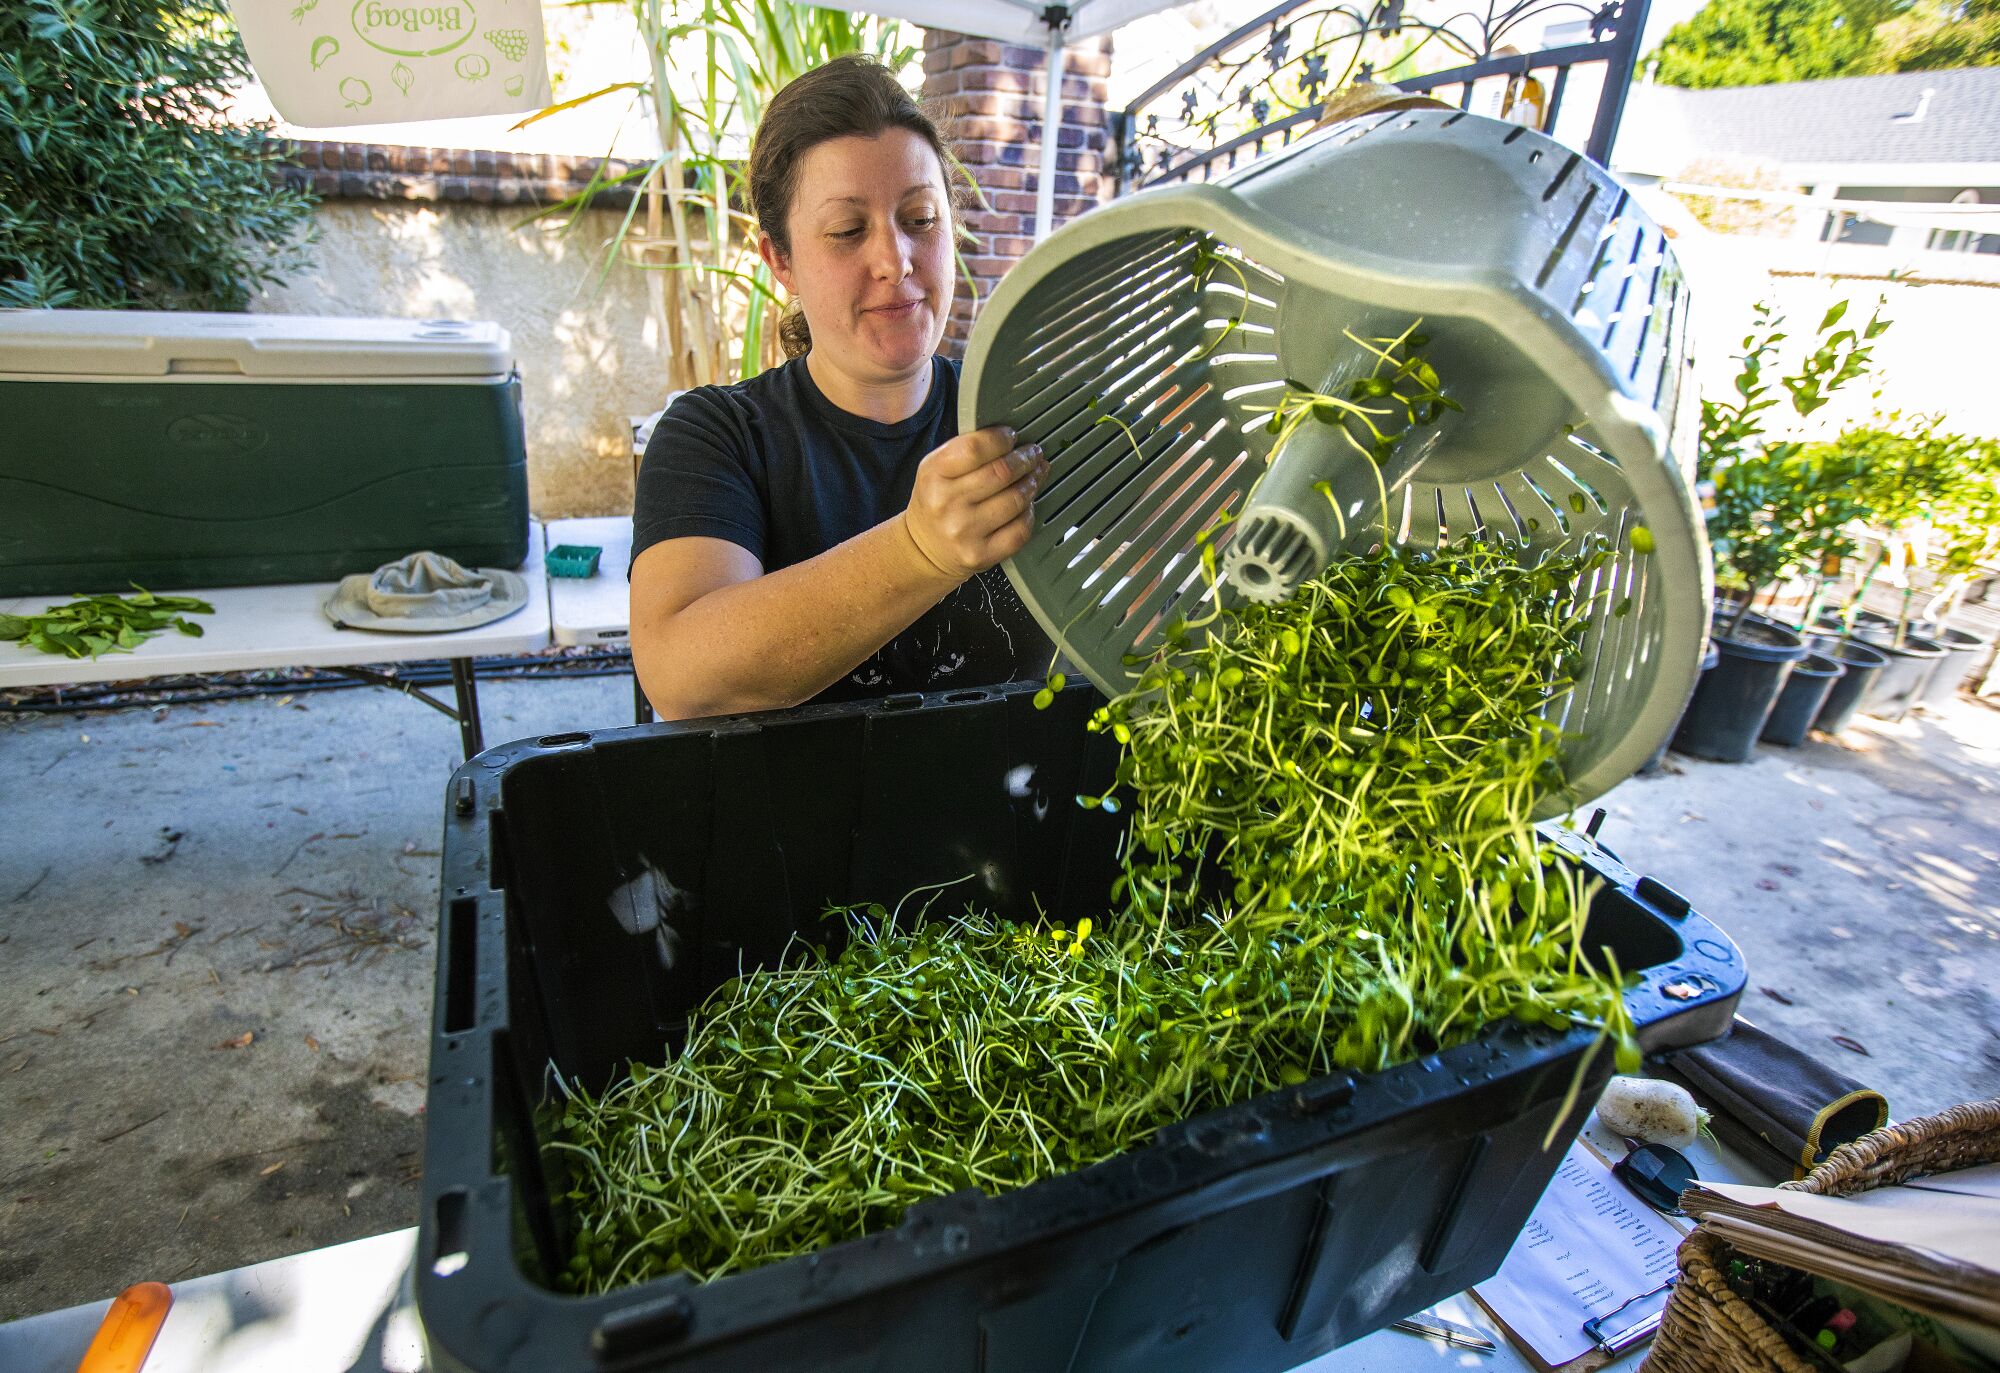 A woman tosses harvested sunflower sprouts into a large plastic bin.